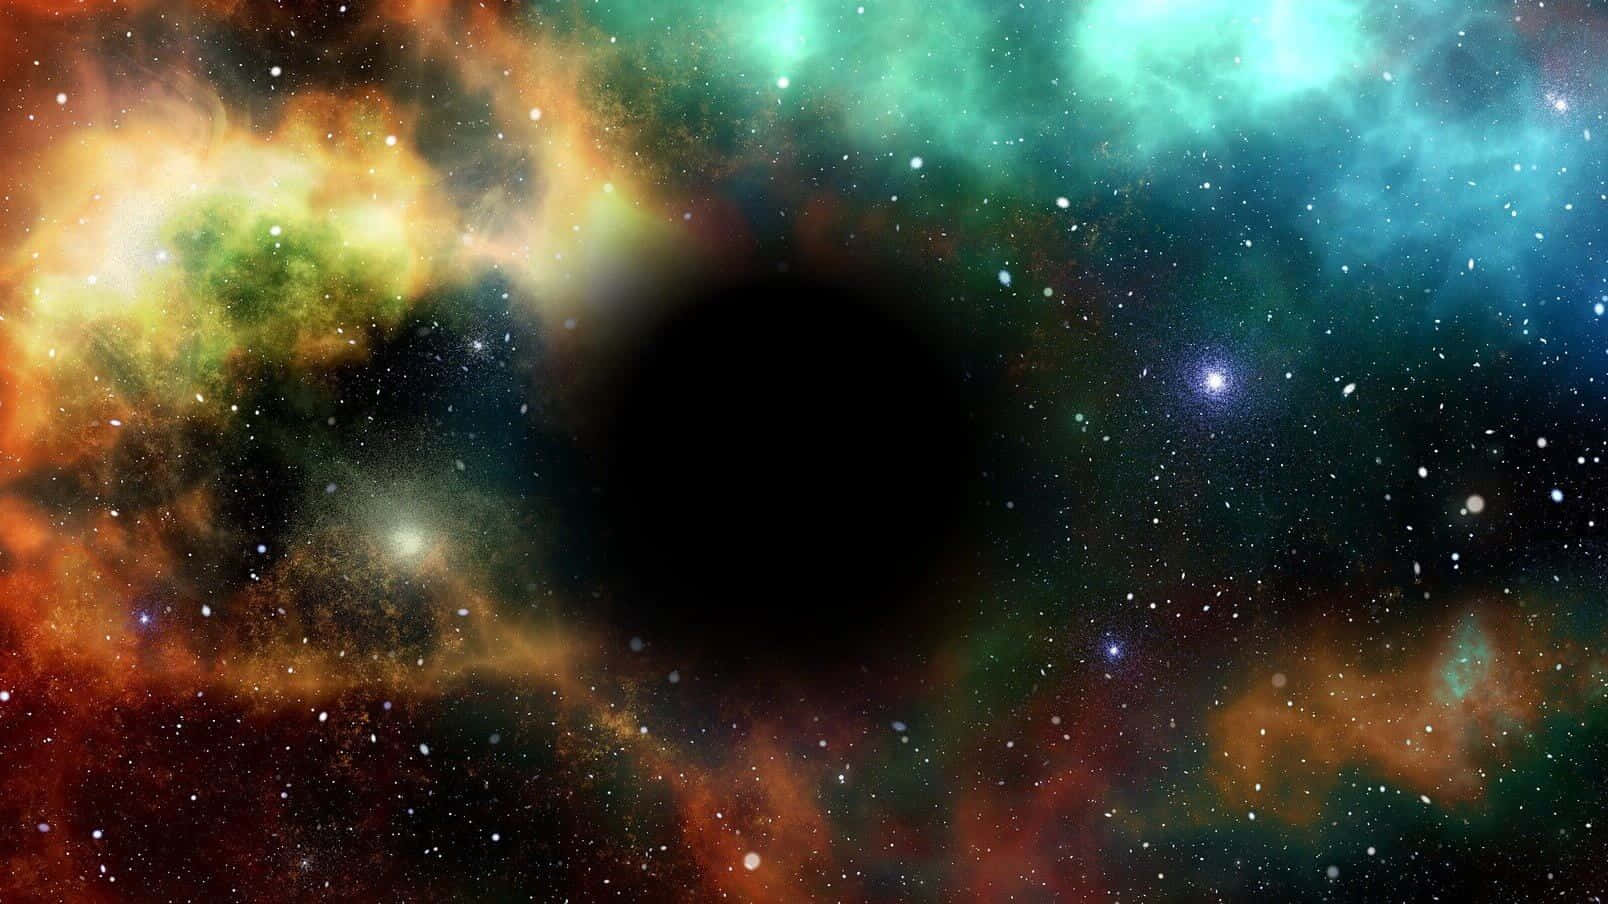 Magnificent View of a Black Hole Through the Hubble Telescope